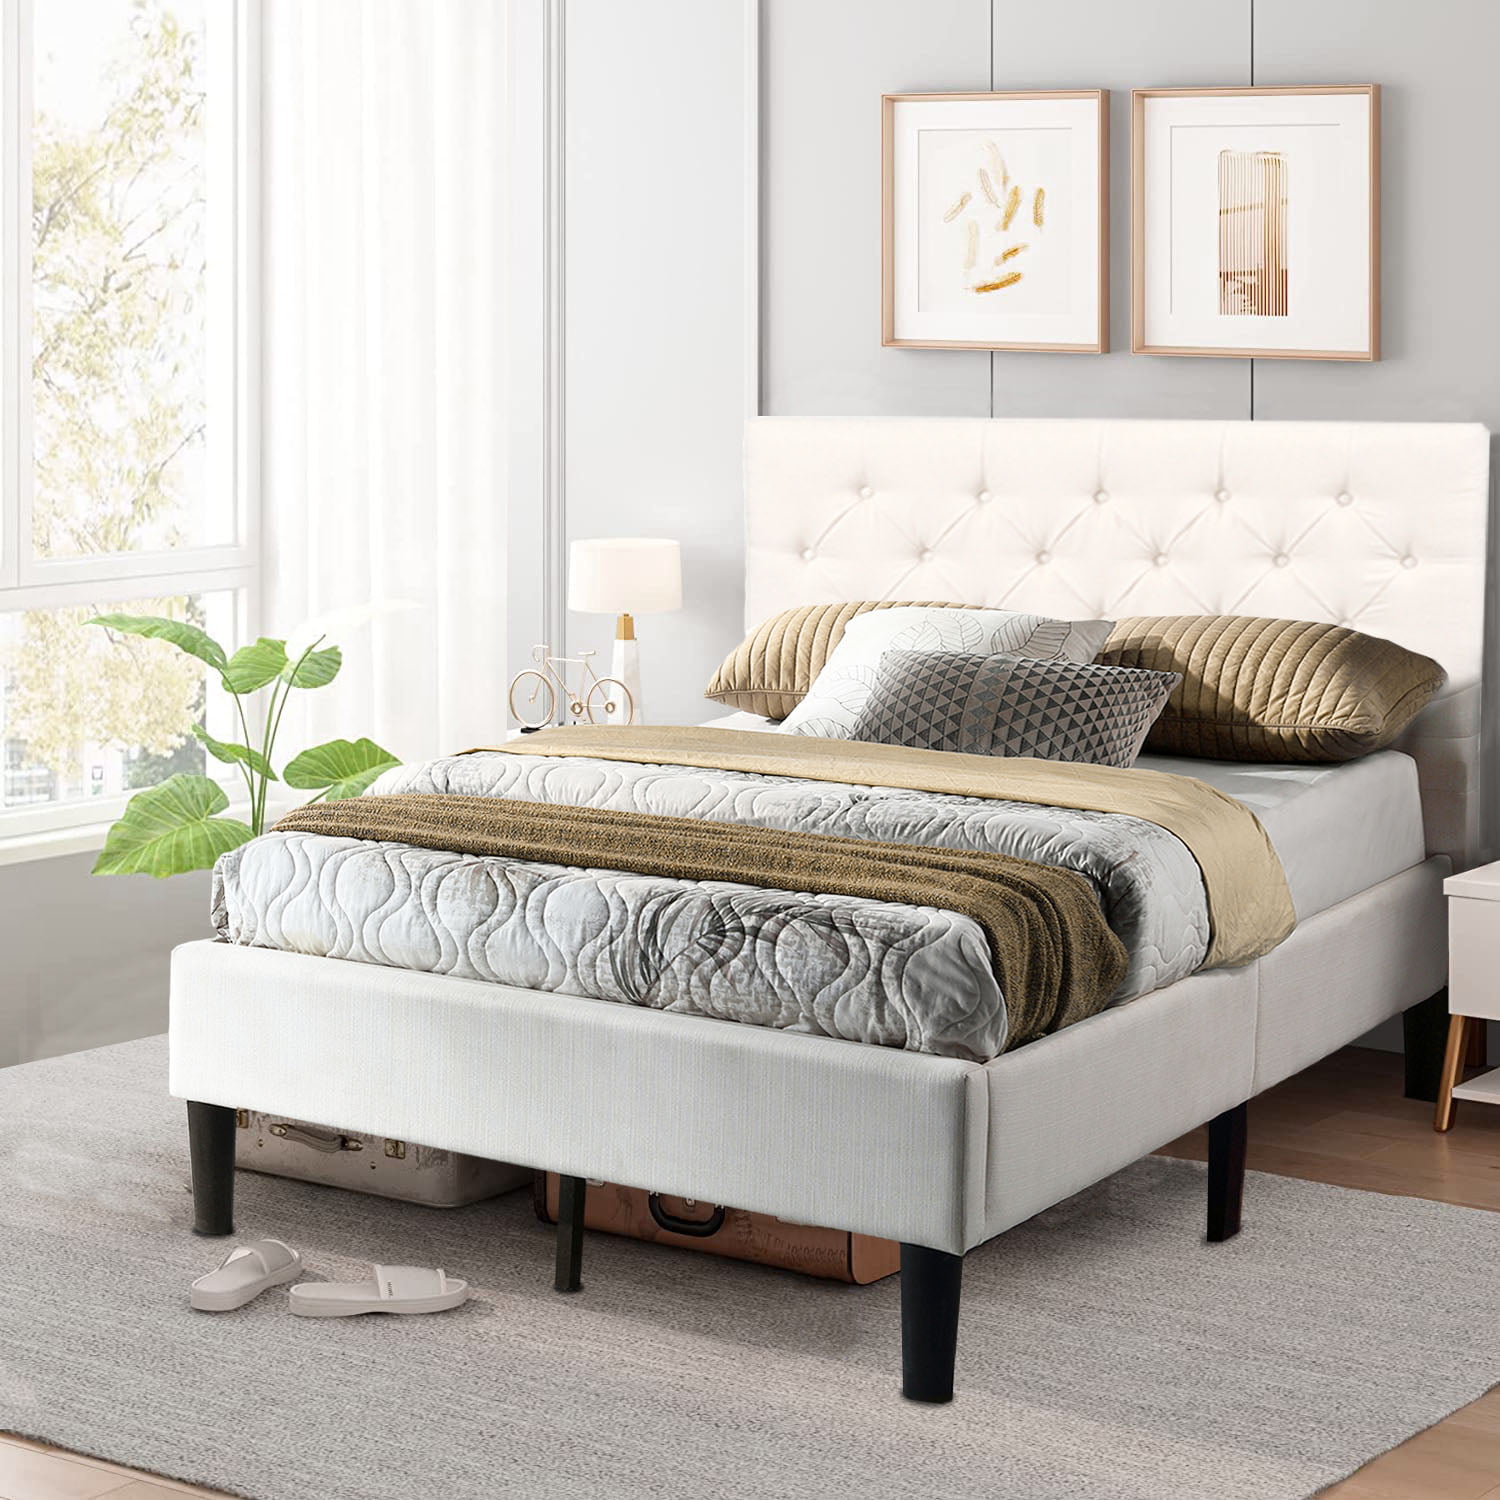 Zinus Upholstered Traditional Tufted Wingback Platform Bed with Wood Slat Support Full